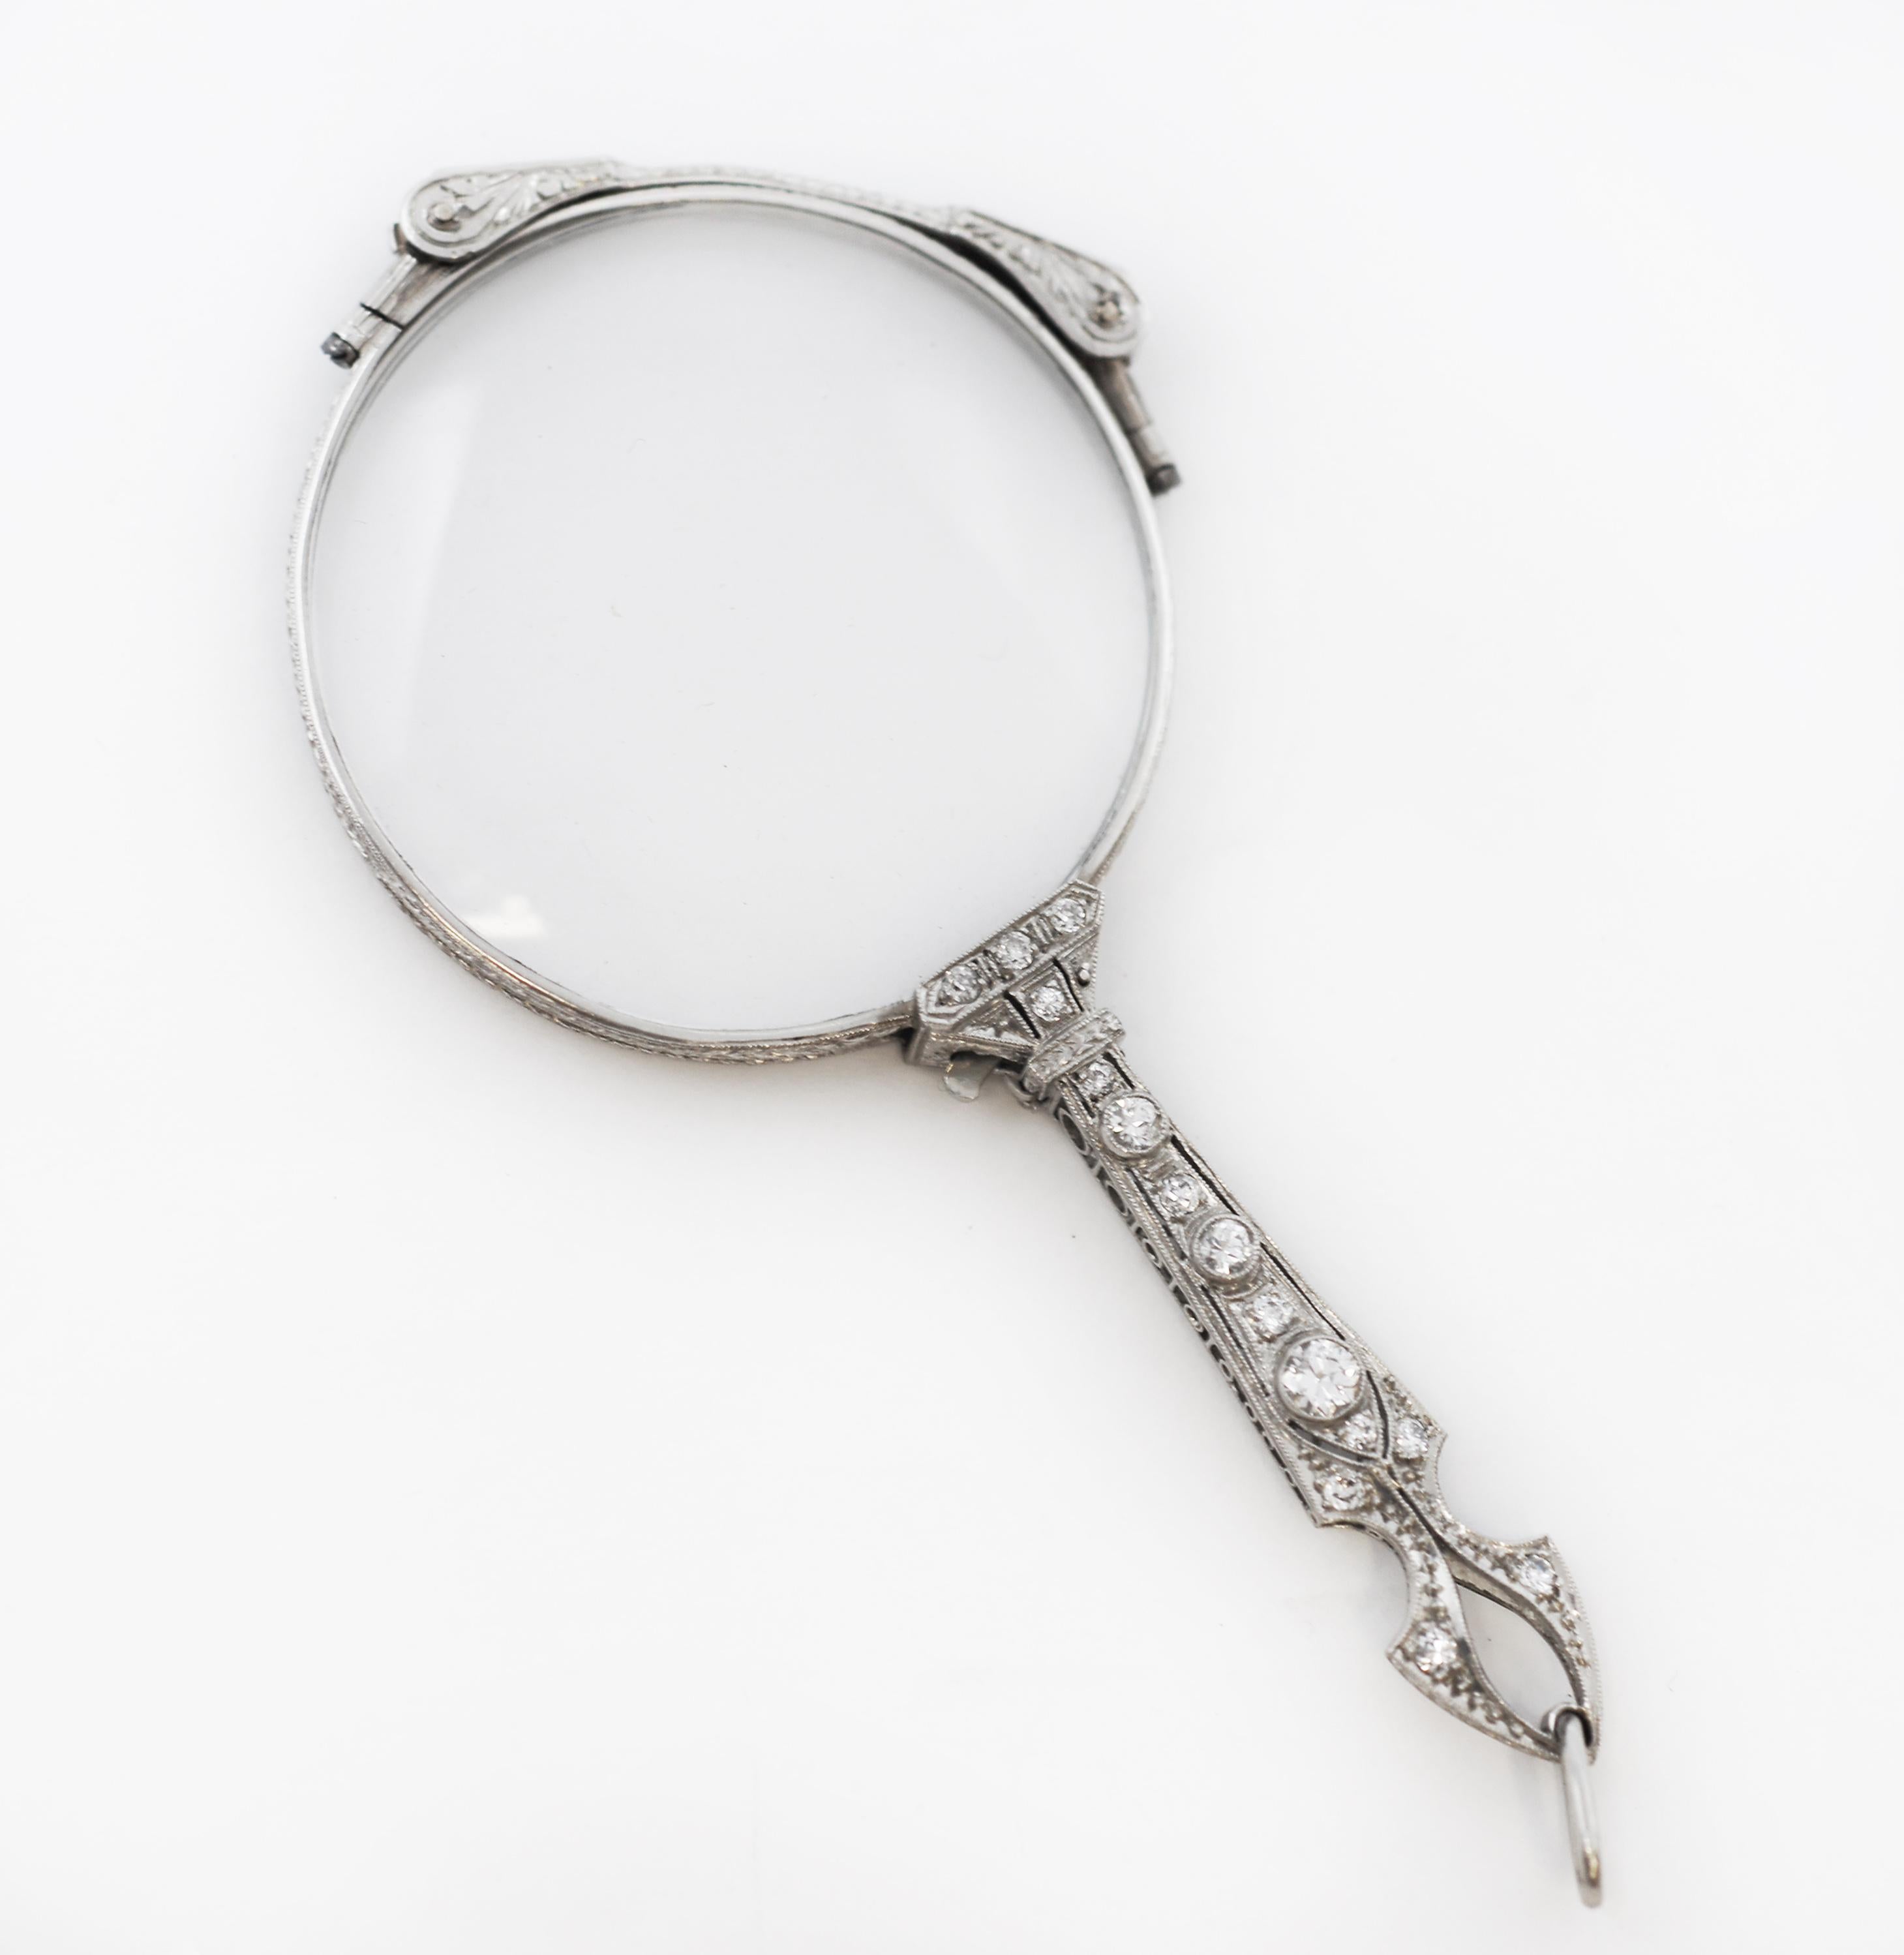 This fabulous platinum lorgnette, with it's fancy openwork handle and twinkling Diamonds. Sleek and modern Edwardian and Art Deco styles together creating a stylish pieces that still found room for the fine forms and lines of previous eras within